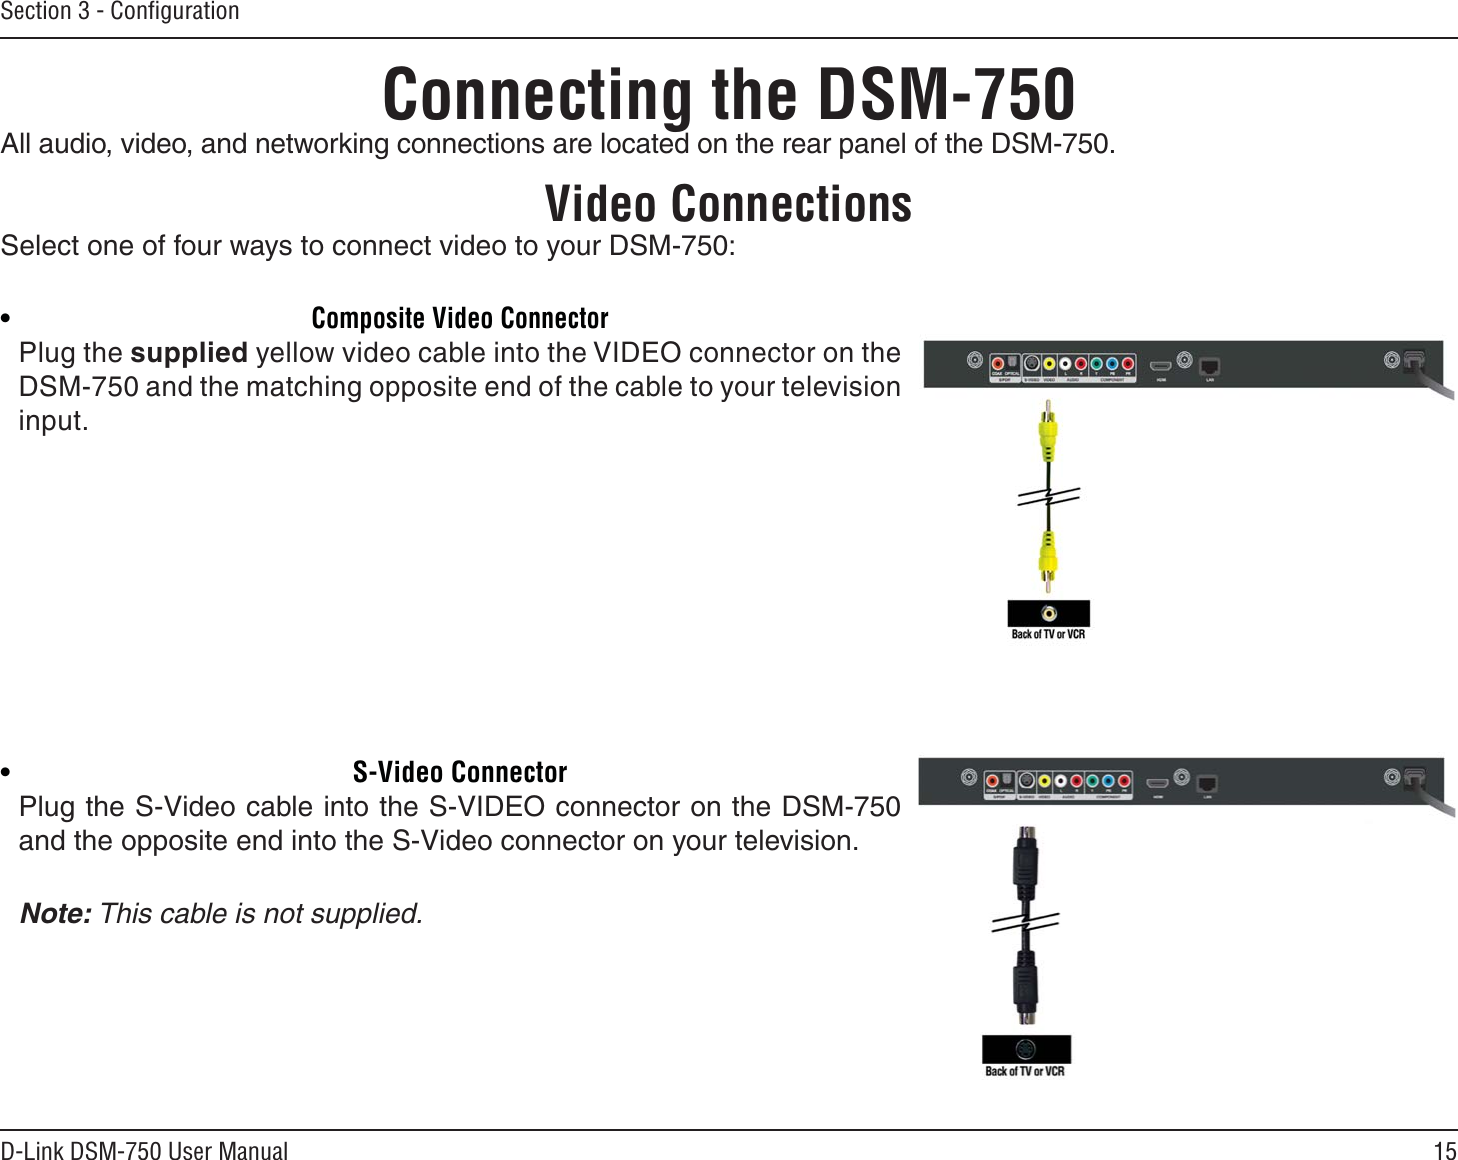 15D-Link DSM-750 User ManualSection 3 - Conﬁguration•Composite Video ConnectorPlug the supplied yellow video cable into the VIDEO connector on the DSM-750 and the matching opposite end of the cable to your television input.•S-Video ConnectorPlug the S-Video cable into the S-VIDEO connector on the DSM-750 and the opposite end into the S-Video connector on your television. Note: This cable is not supplied.Connecting the DSM-750All audio, video, and networking connections are located on the rear panel of the DSM-750. Video ConnectionsSelect one of four ways to connect video to your DSM-750: